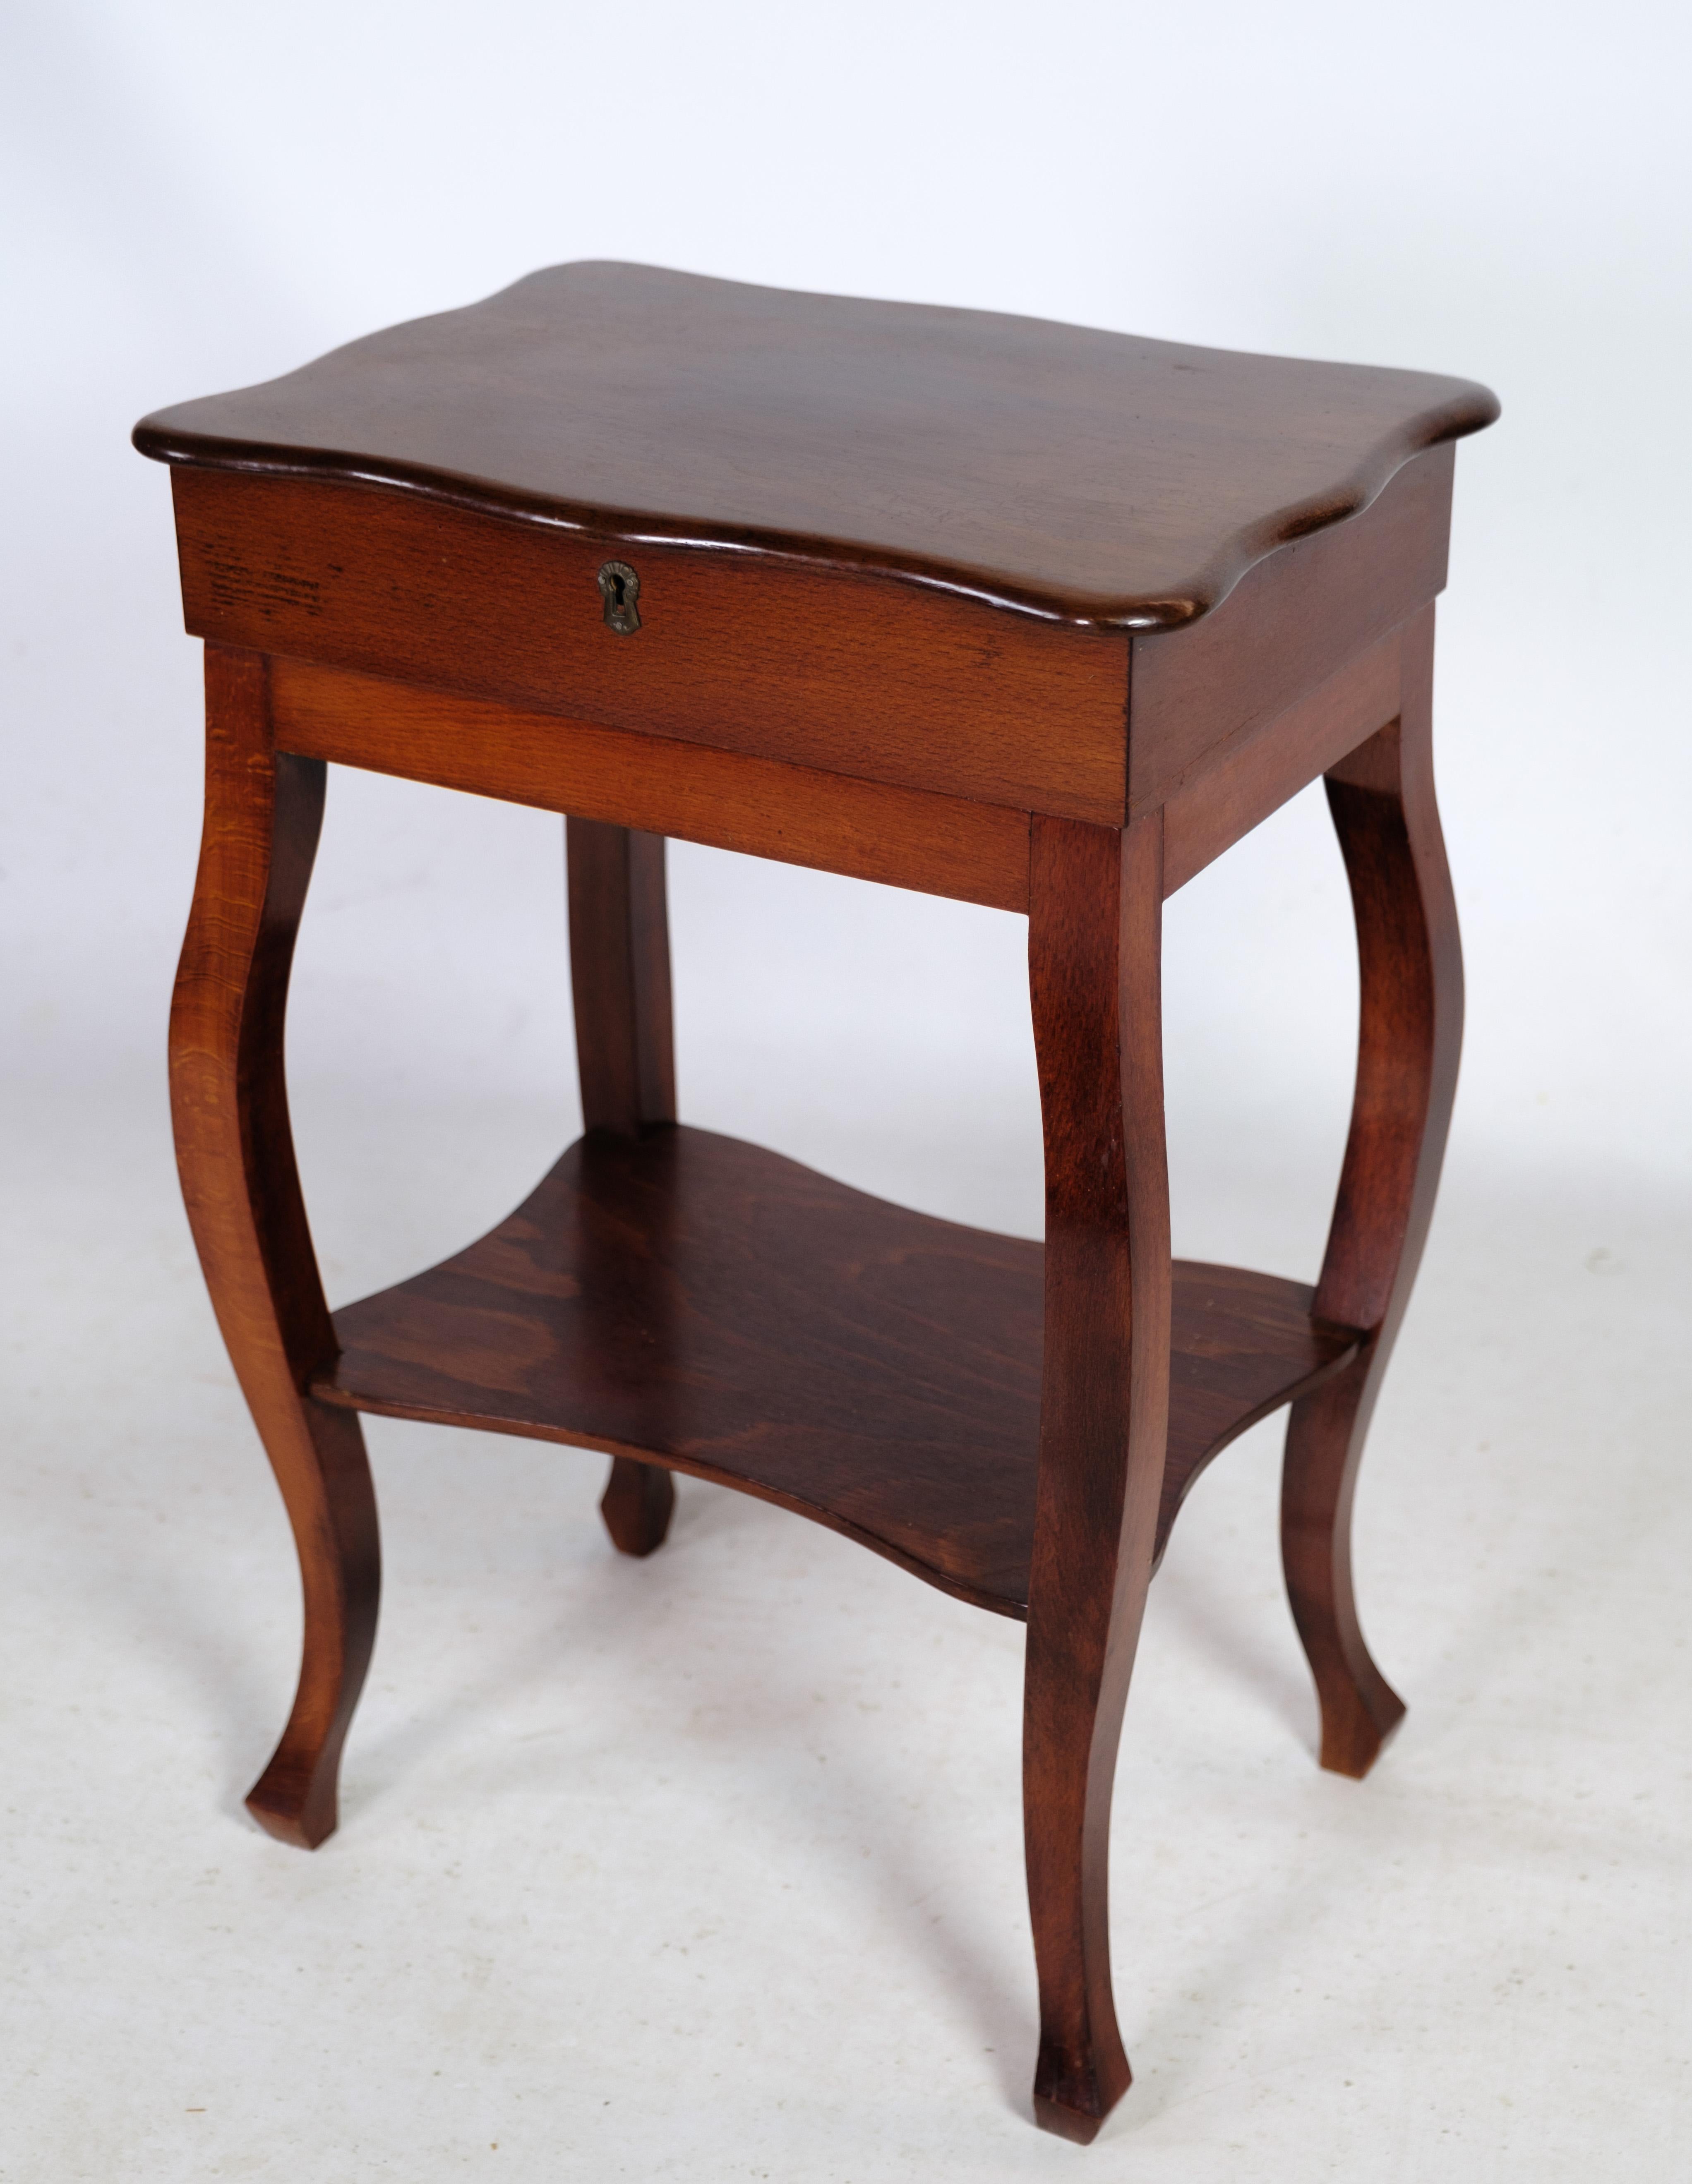 Side table / Sewing table with folding table top with shelf below made in mahogany from around the 1880s.

This product will be inspected thoroughly at our professional workshop by our educated employees, who assure the product quality.